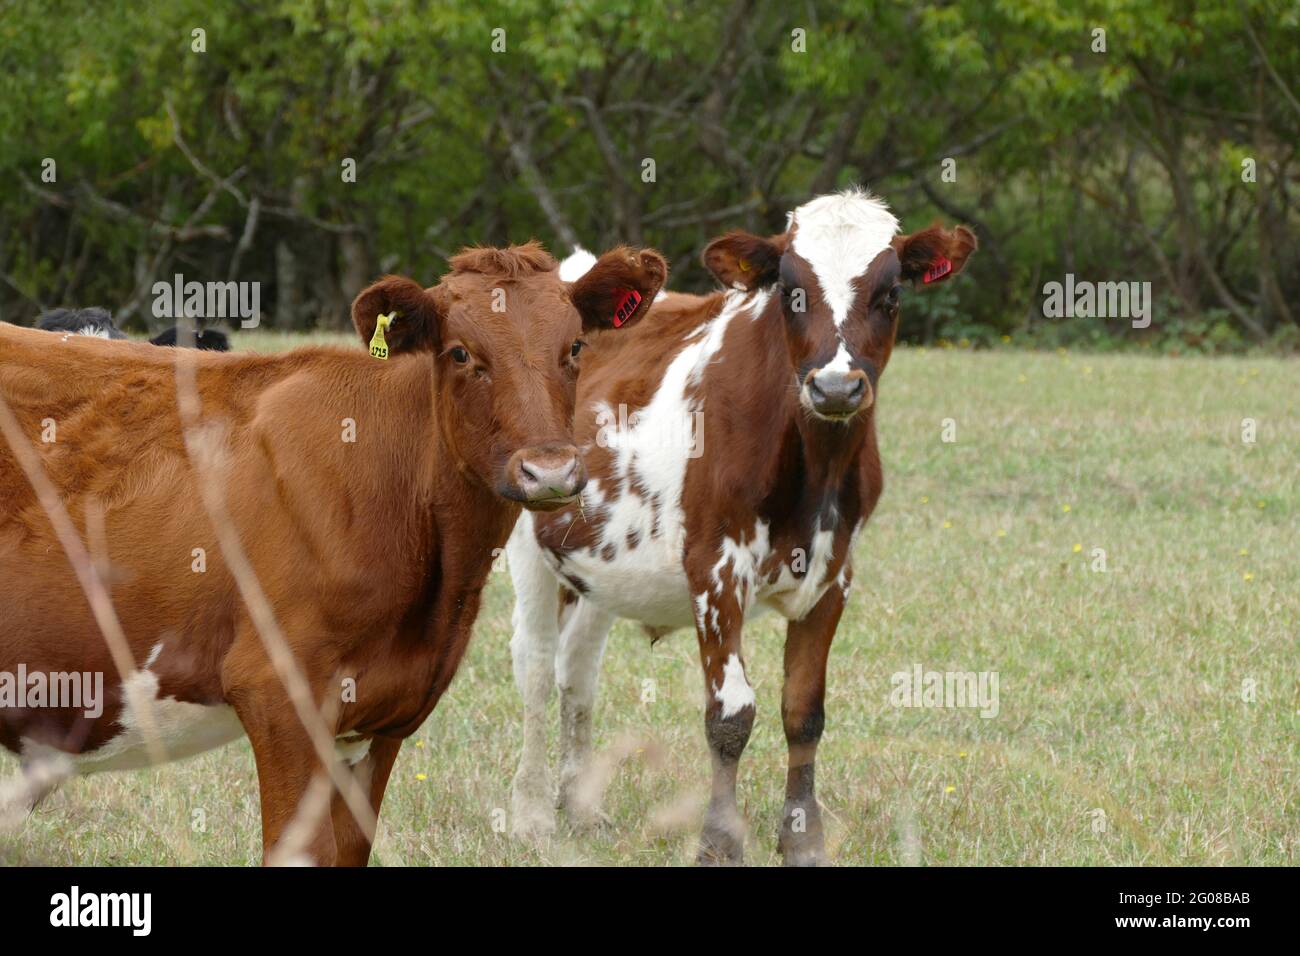 Two curious cows in a grassy field Stock Photo